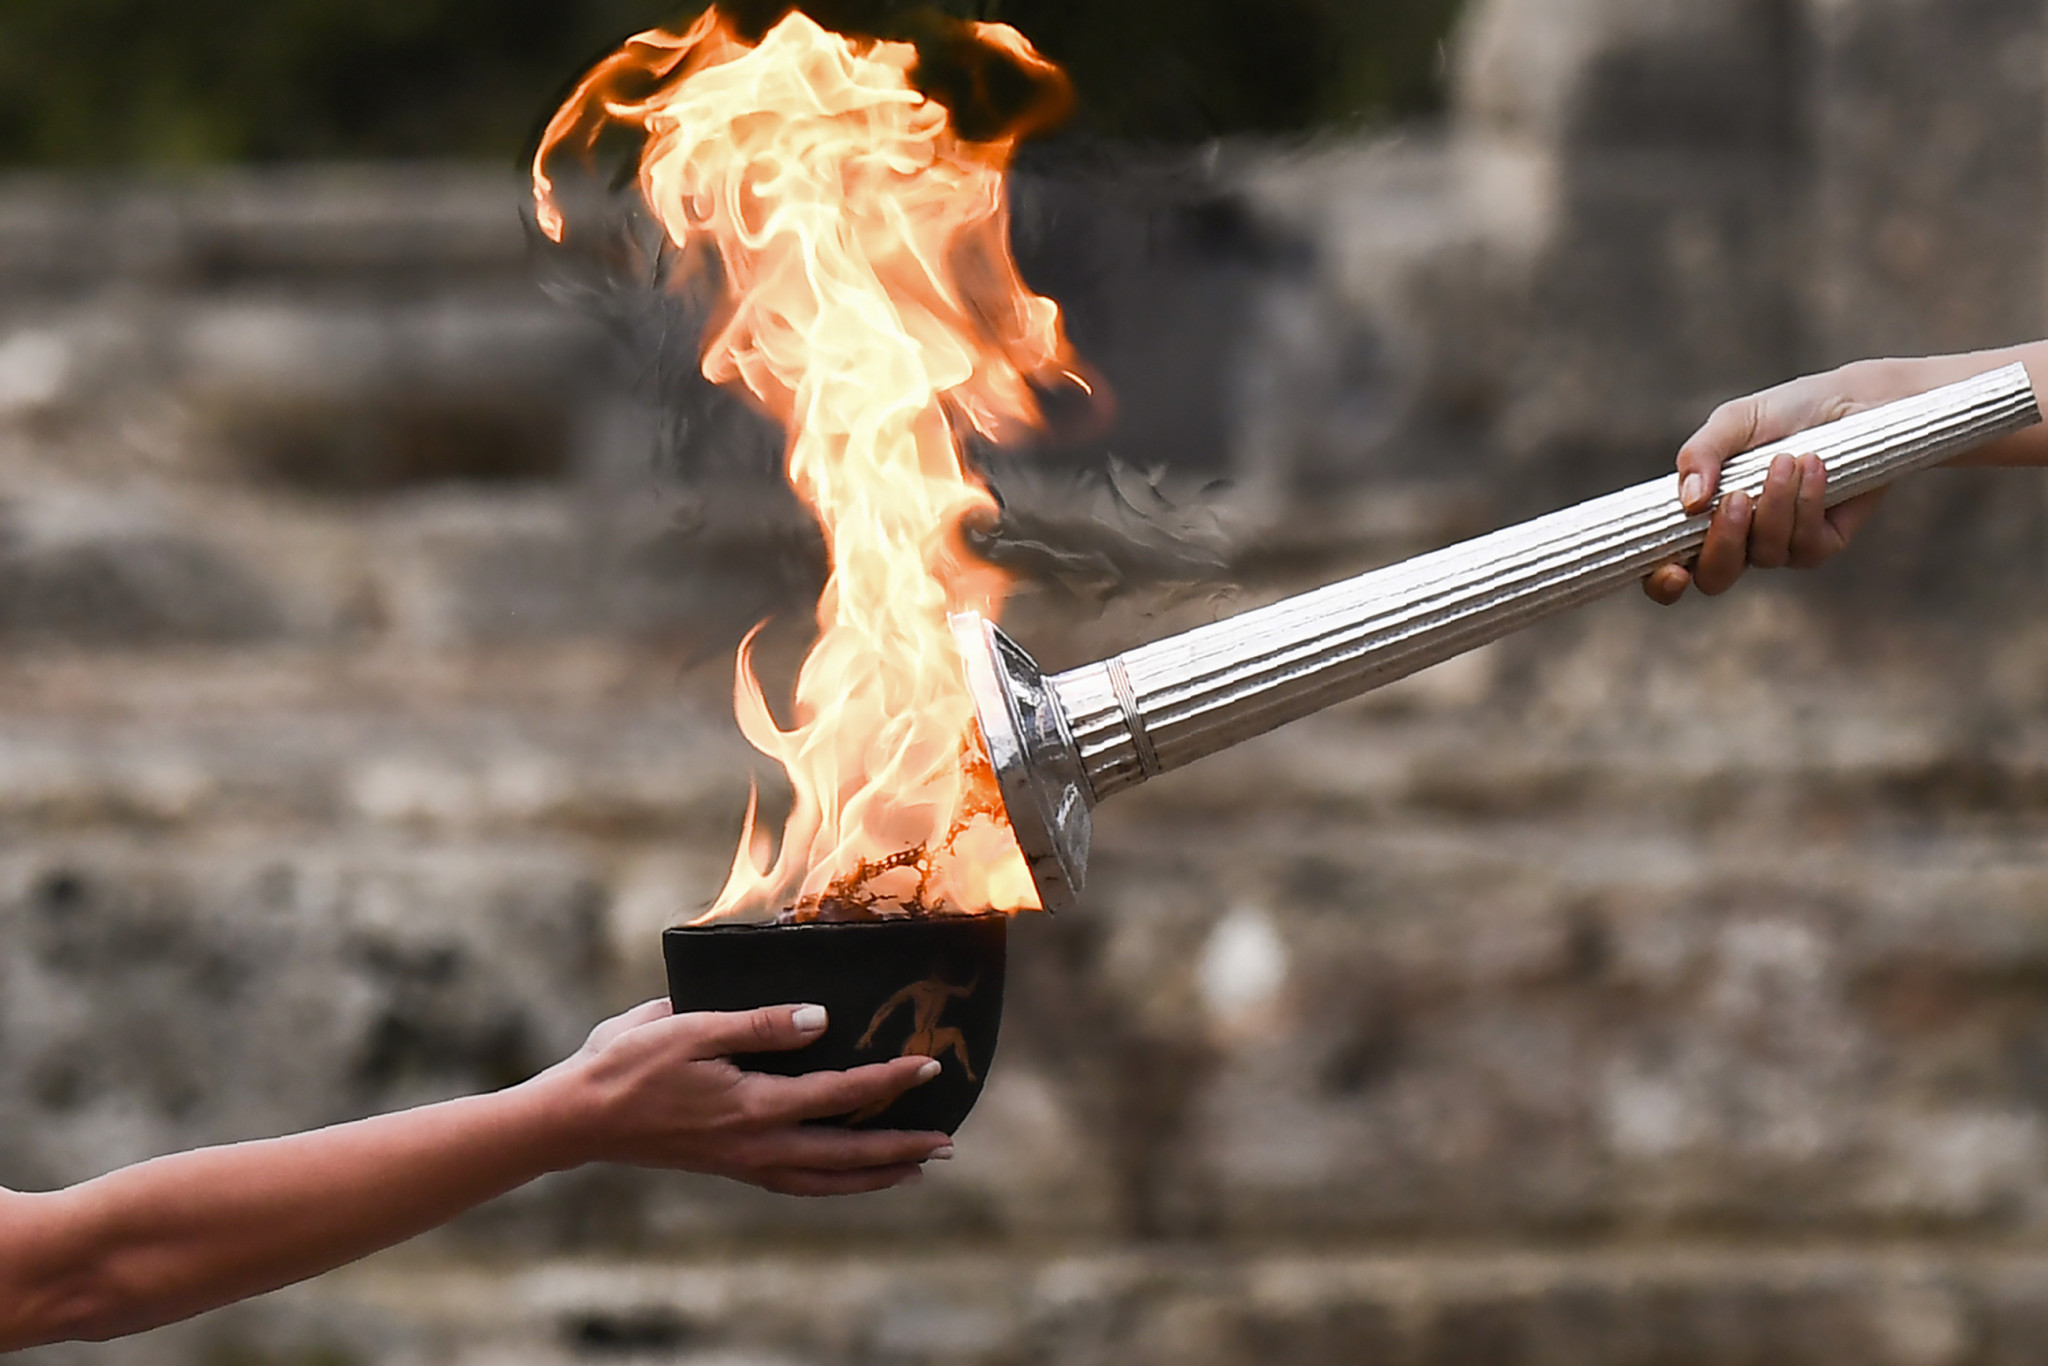 Pyeongchang 2018 Torch lighting takes place with reserve flame